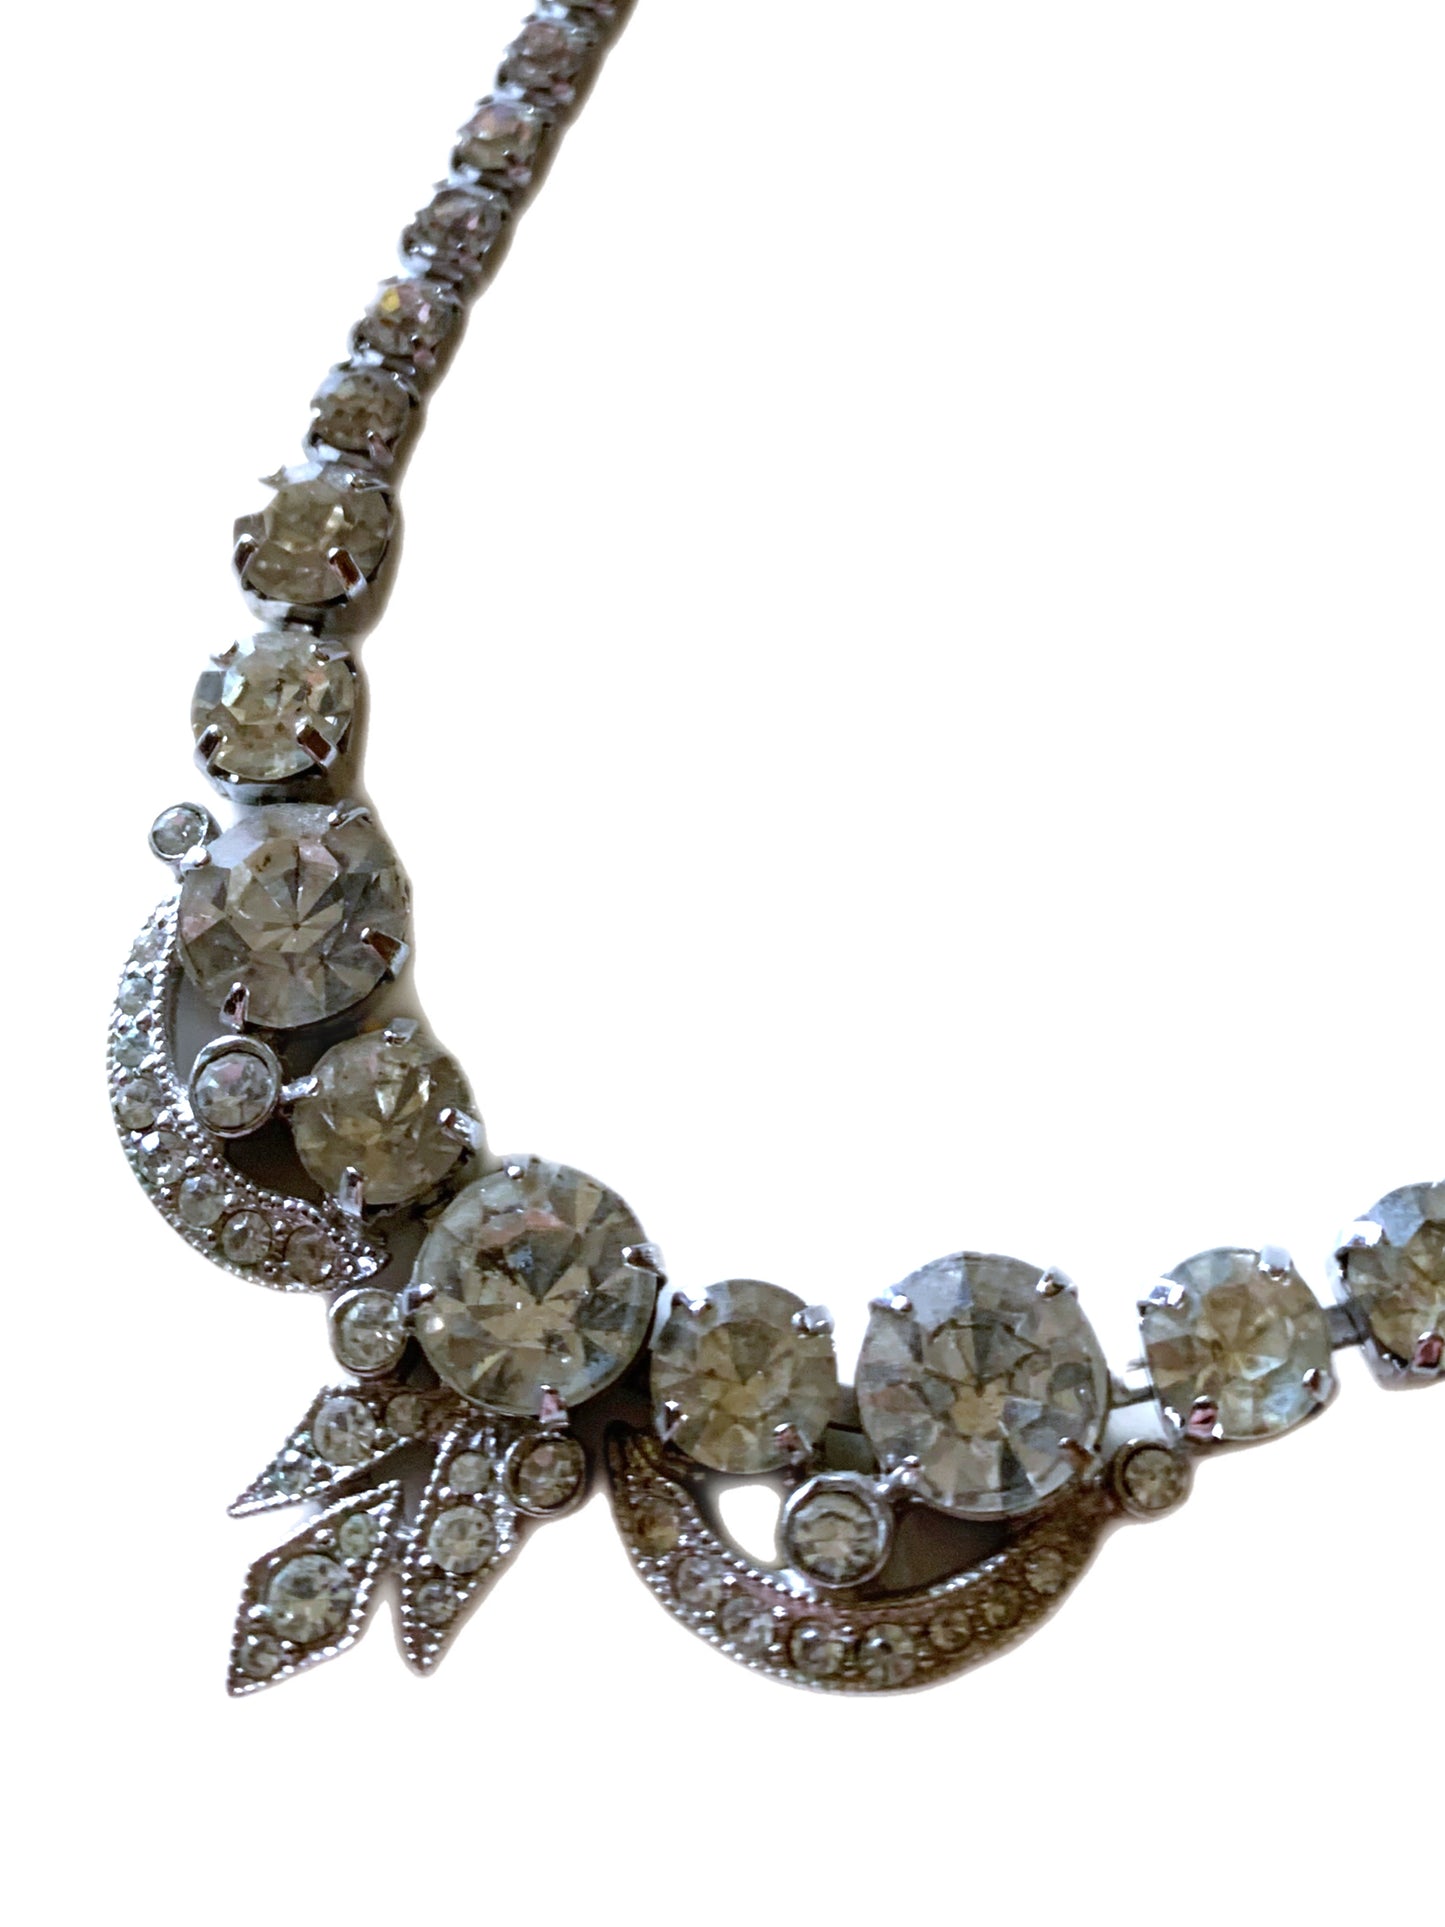 Clear Rhinestone and Marcasite Choker Necklace circa 1950s